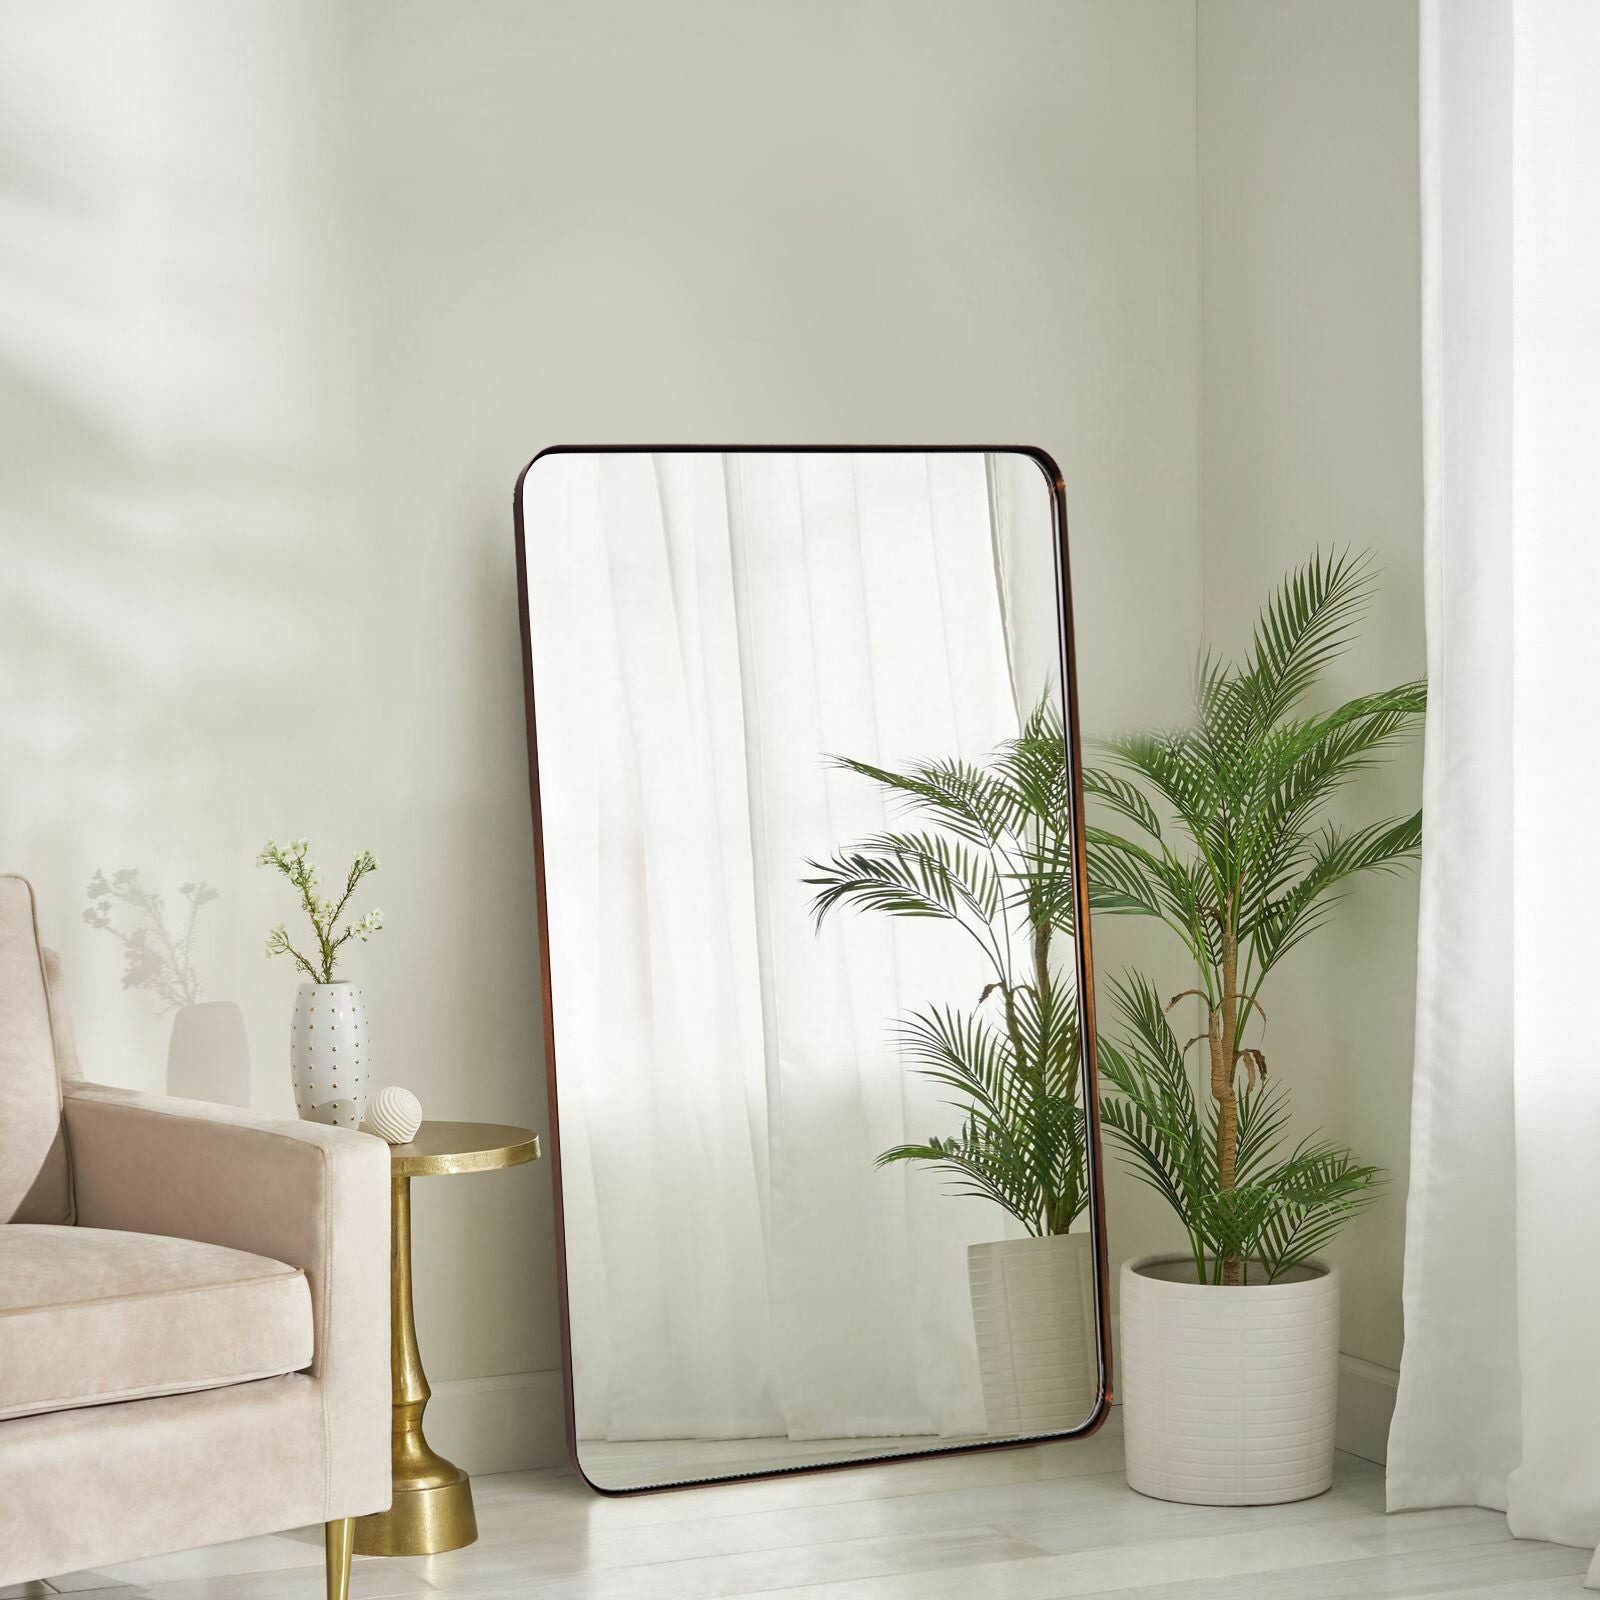 ANDY STAR® Full Length Mirror  Full Body  Long Mirror  Wall-mounted/Leaning Mirror